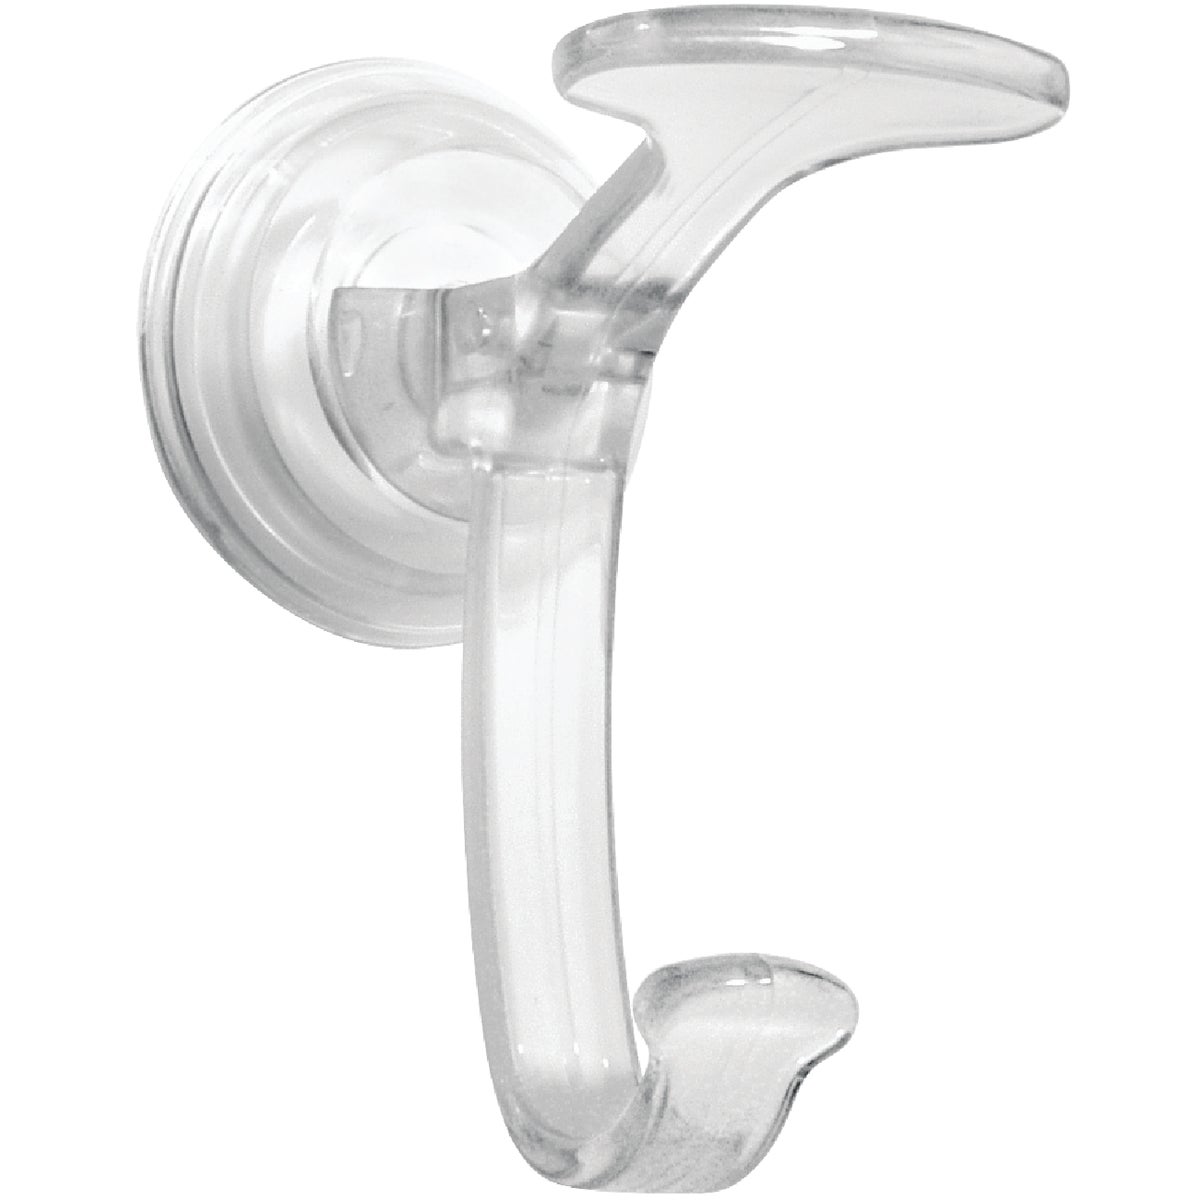 Item 602310, Spa suction cup featuring PowerLock suction.